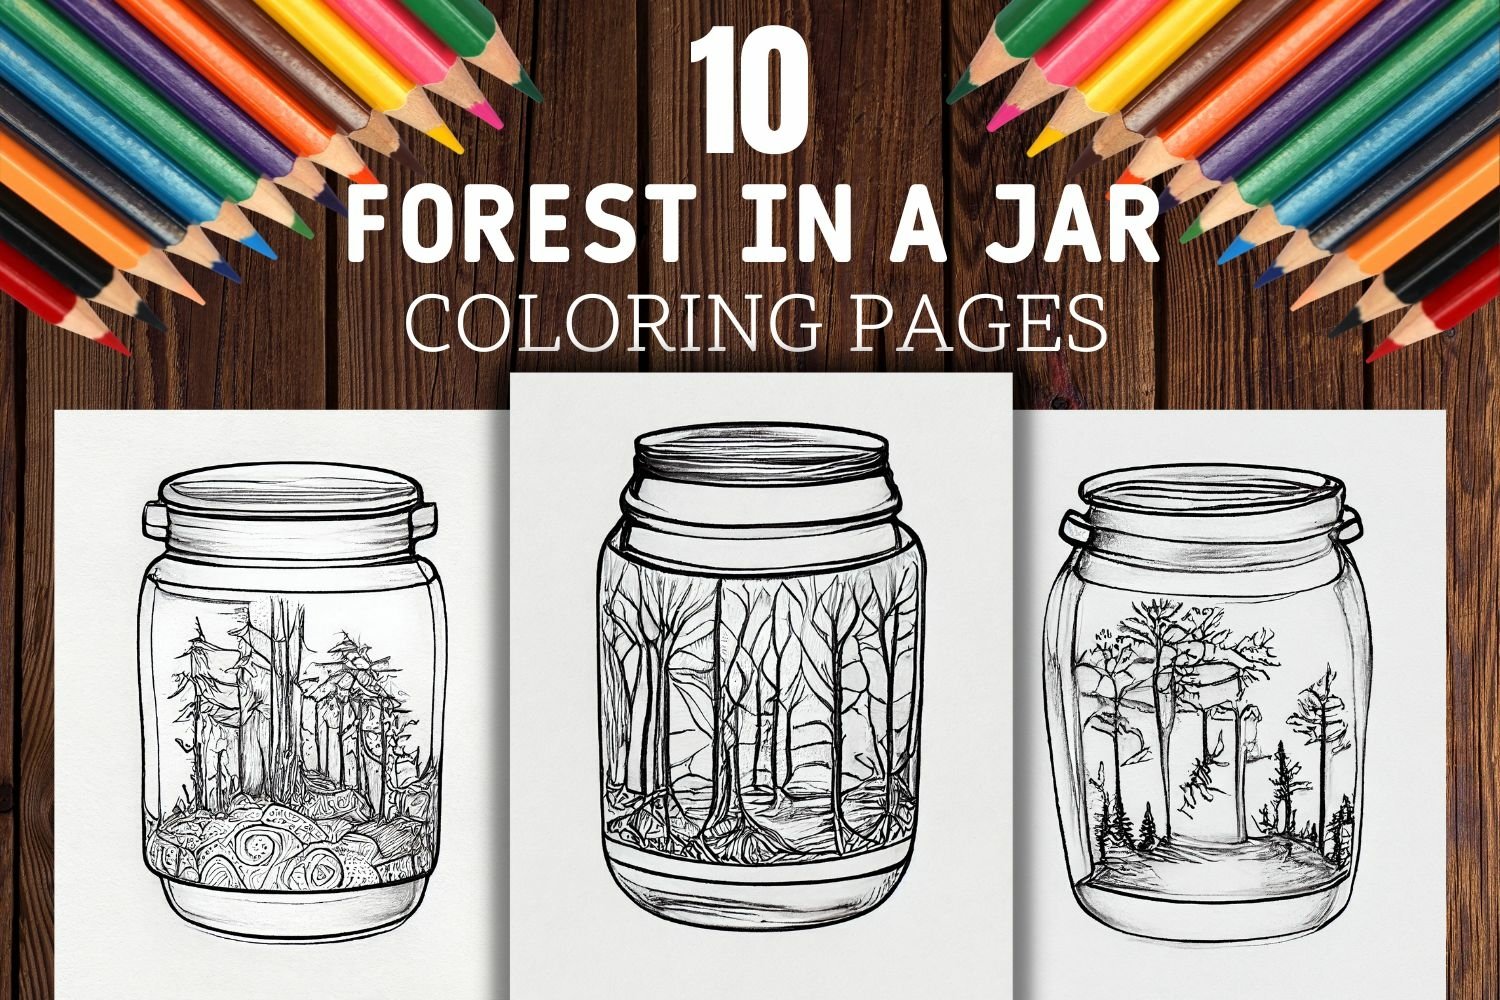 Forest in a jar coloring pages